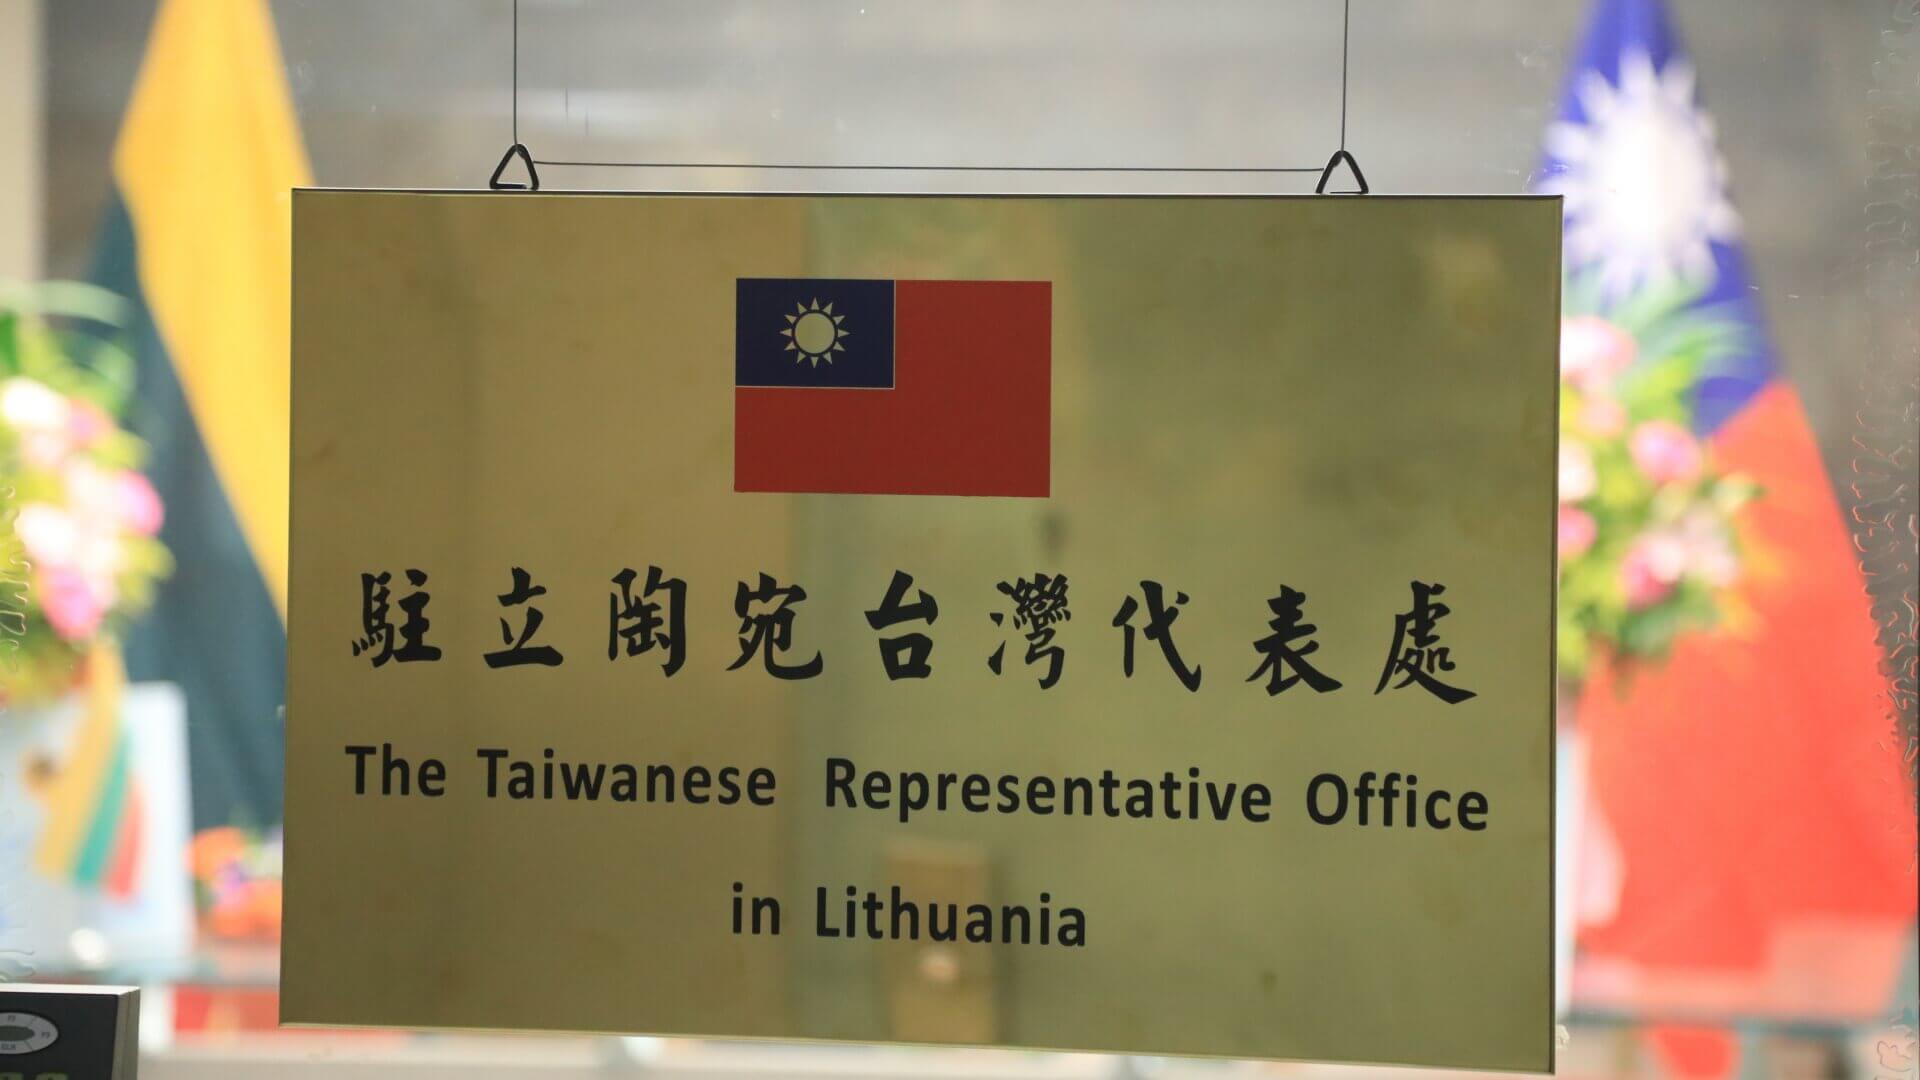 China Downgrades Relations With Lithuania After Taiwan Embassy Fiasco